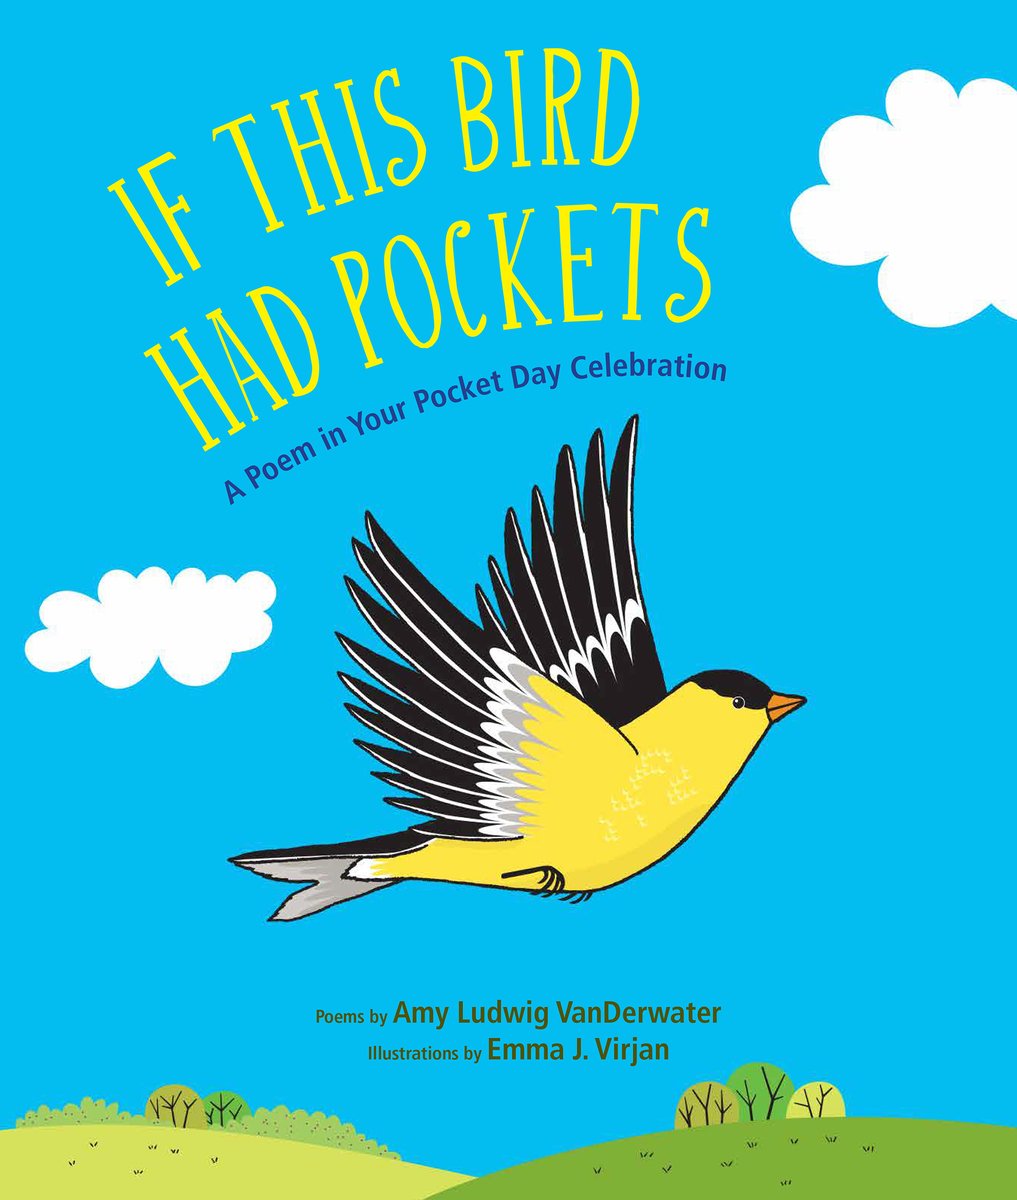 GIVEAWAY! Celebrate Poem in Your Pocket Day today! @astrakidsbooks will give away 5 copies of IF THIS BIRD HAD POCKETS. Retweet this tweet before 9:00 pm for you chance to win. @amylvpoemfarm